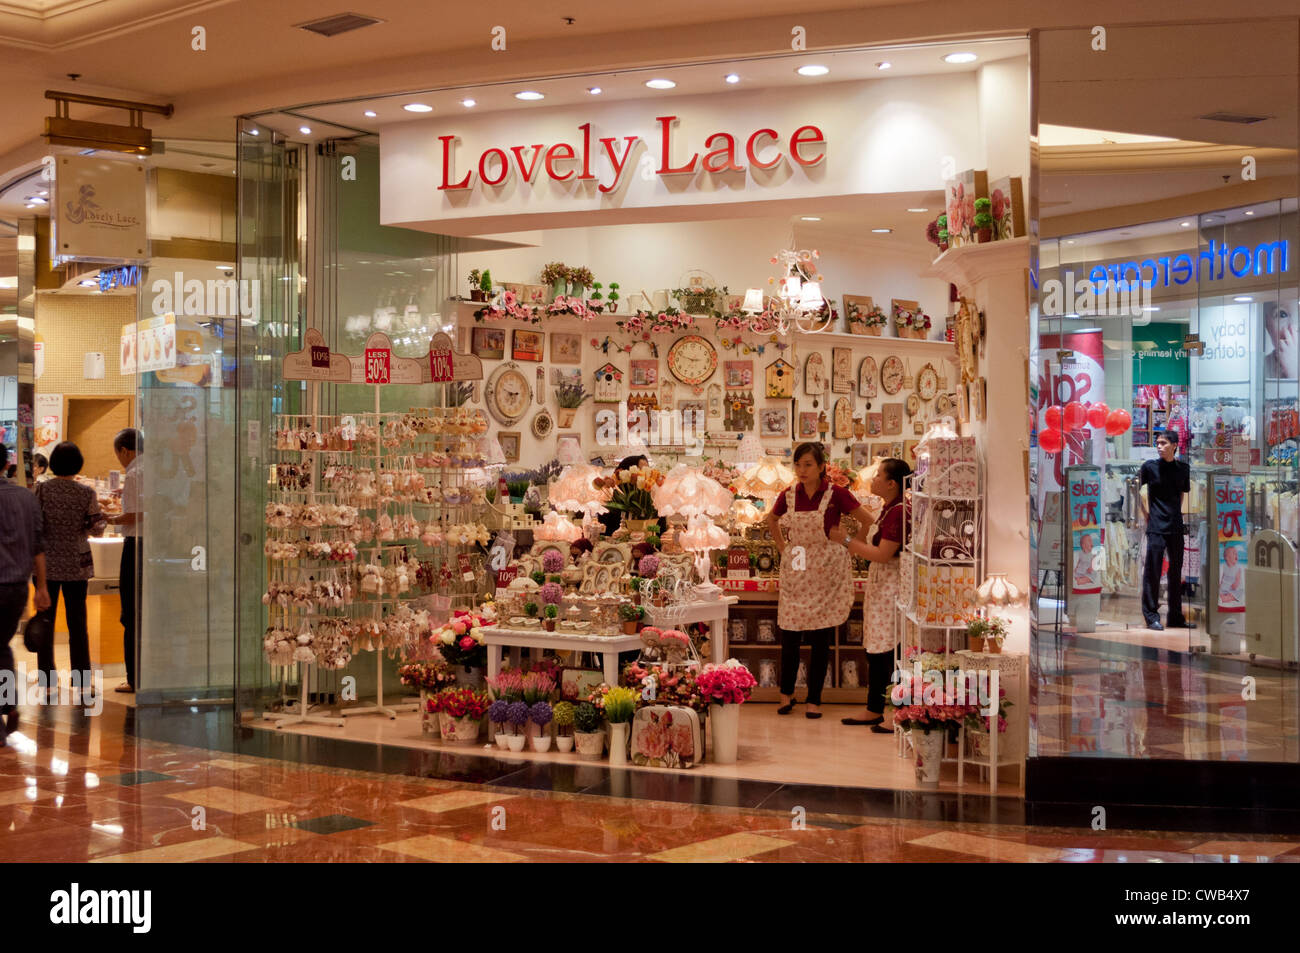 Lovely Lace shop in Mall Taman Anggrek, Jakarta, Indonesia Stock Photo